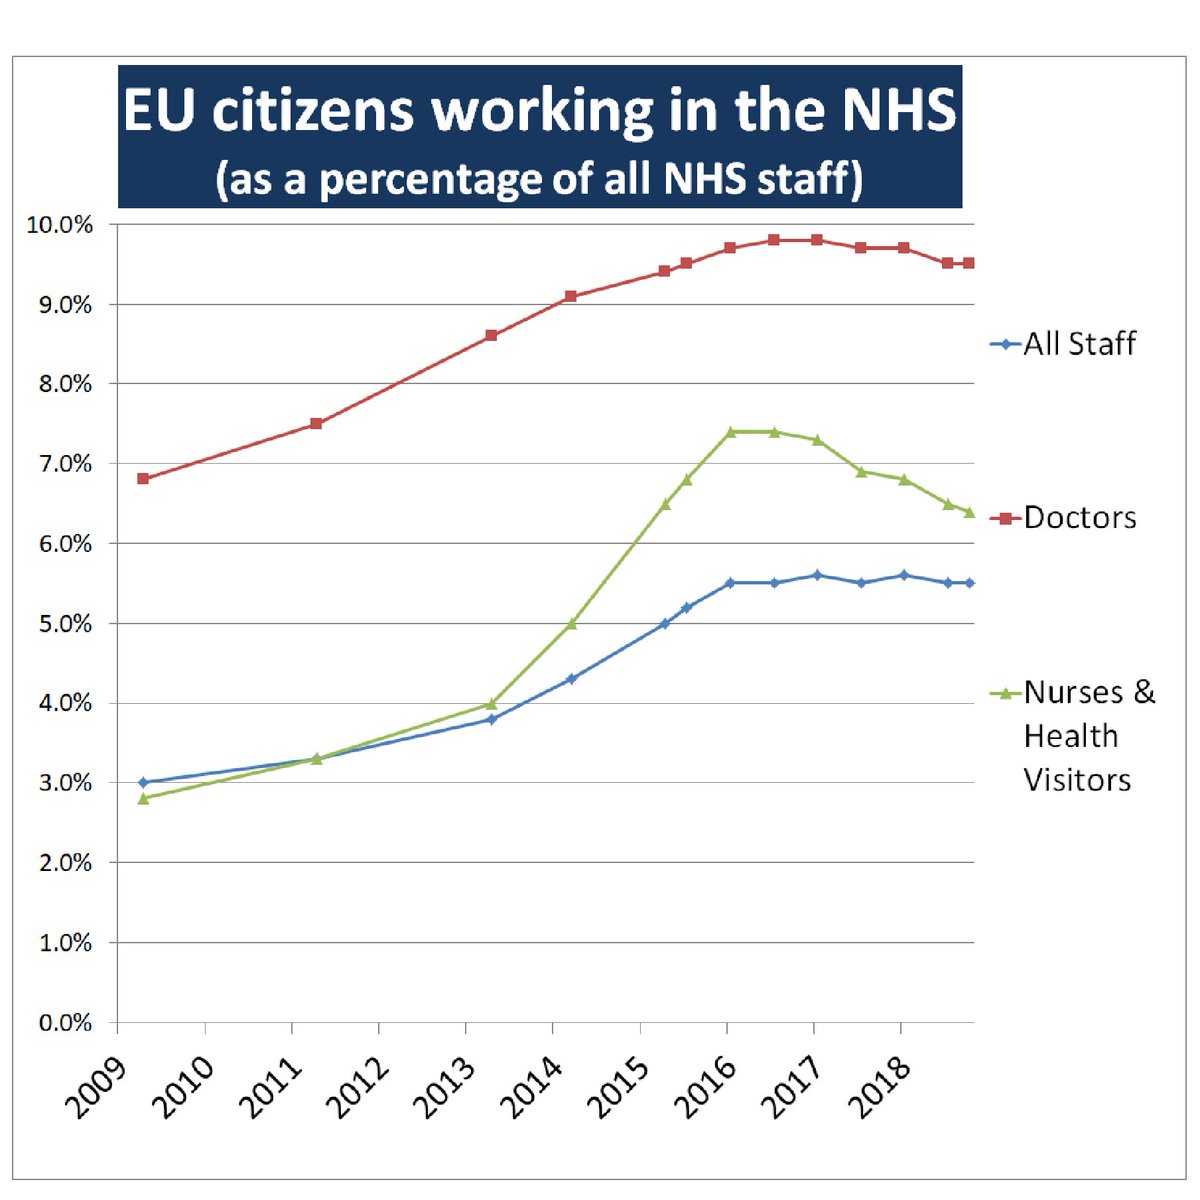 Do you remember the last big story before Coronavirus took over?The NHS was saying the government's immigration plans had done nothing to reassure EU medical staff (statistically improve UK doctor-patient ratio).Brexit has been harming our NHS since 2016 https://www.health.org.uk/news-and-comment/news/new-immigration-system-will-make-social-care-crisis-even-worse